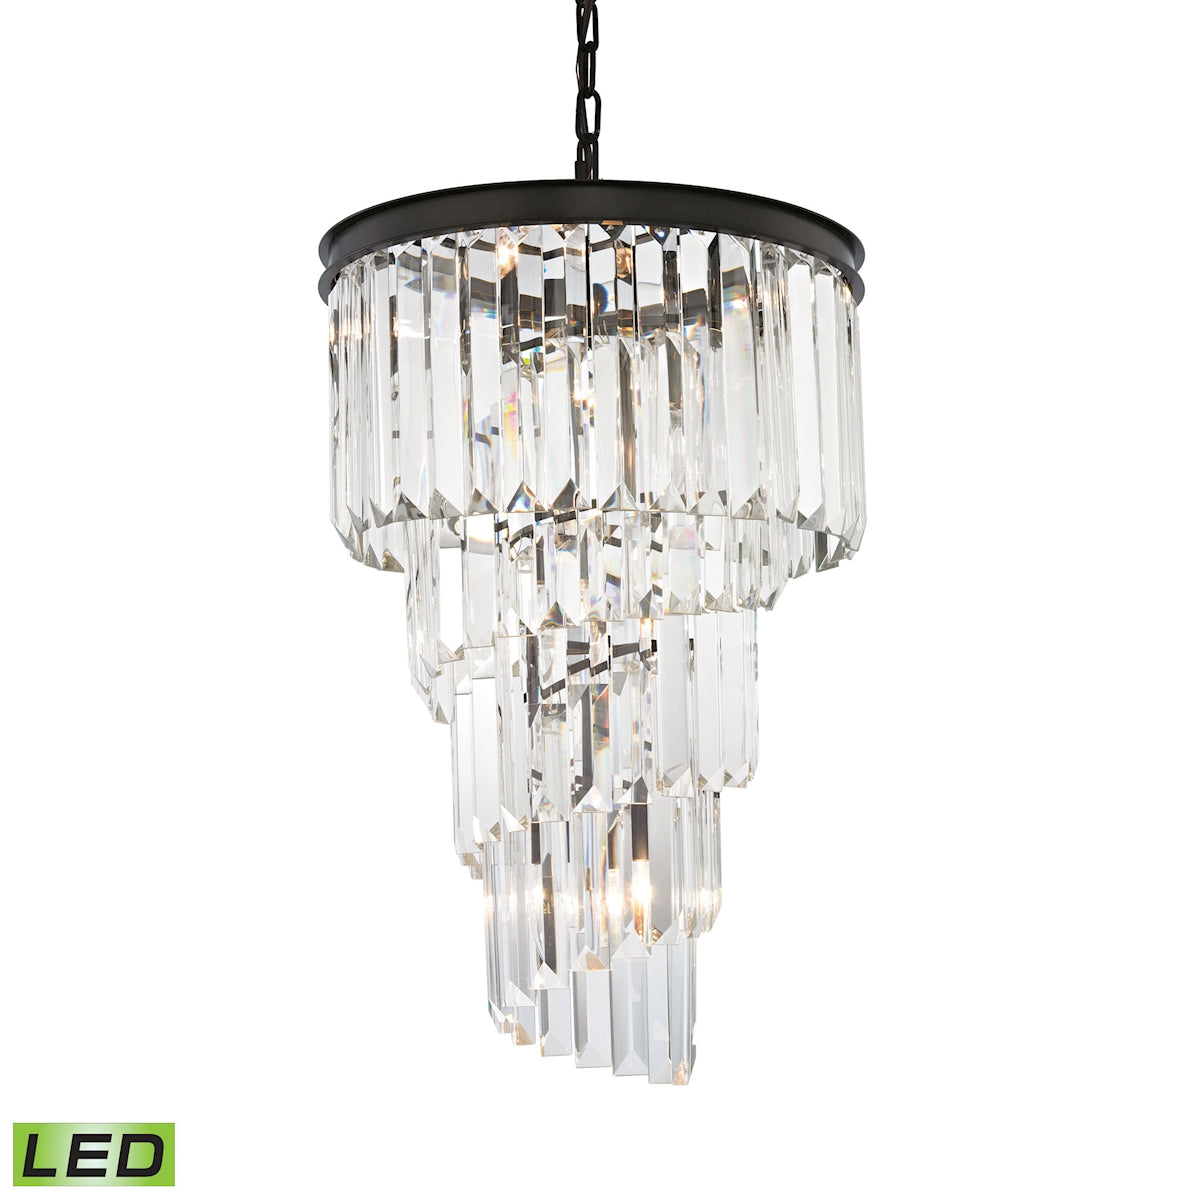 Palacial 6-Light Chandelier in Oil Rubbed Bronze with Clear Crystal - Includes LED Bulbs